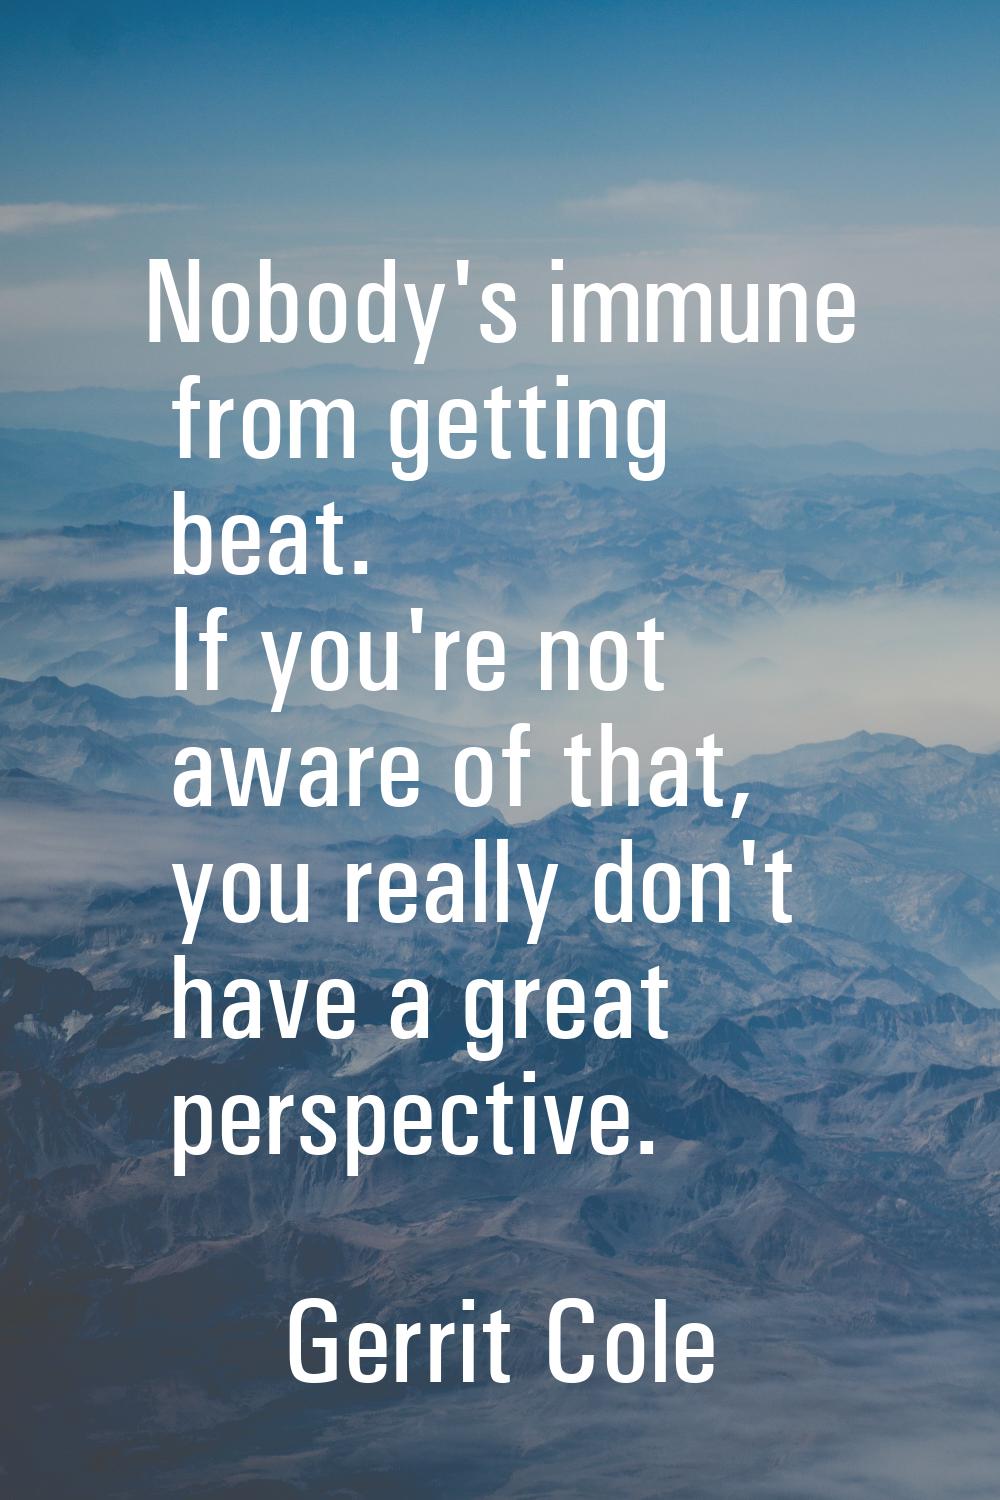 Nobody's immune from getting beat. If you're not aware of that, you really don't have a great persp